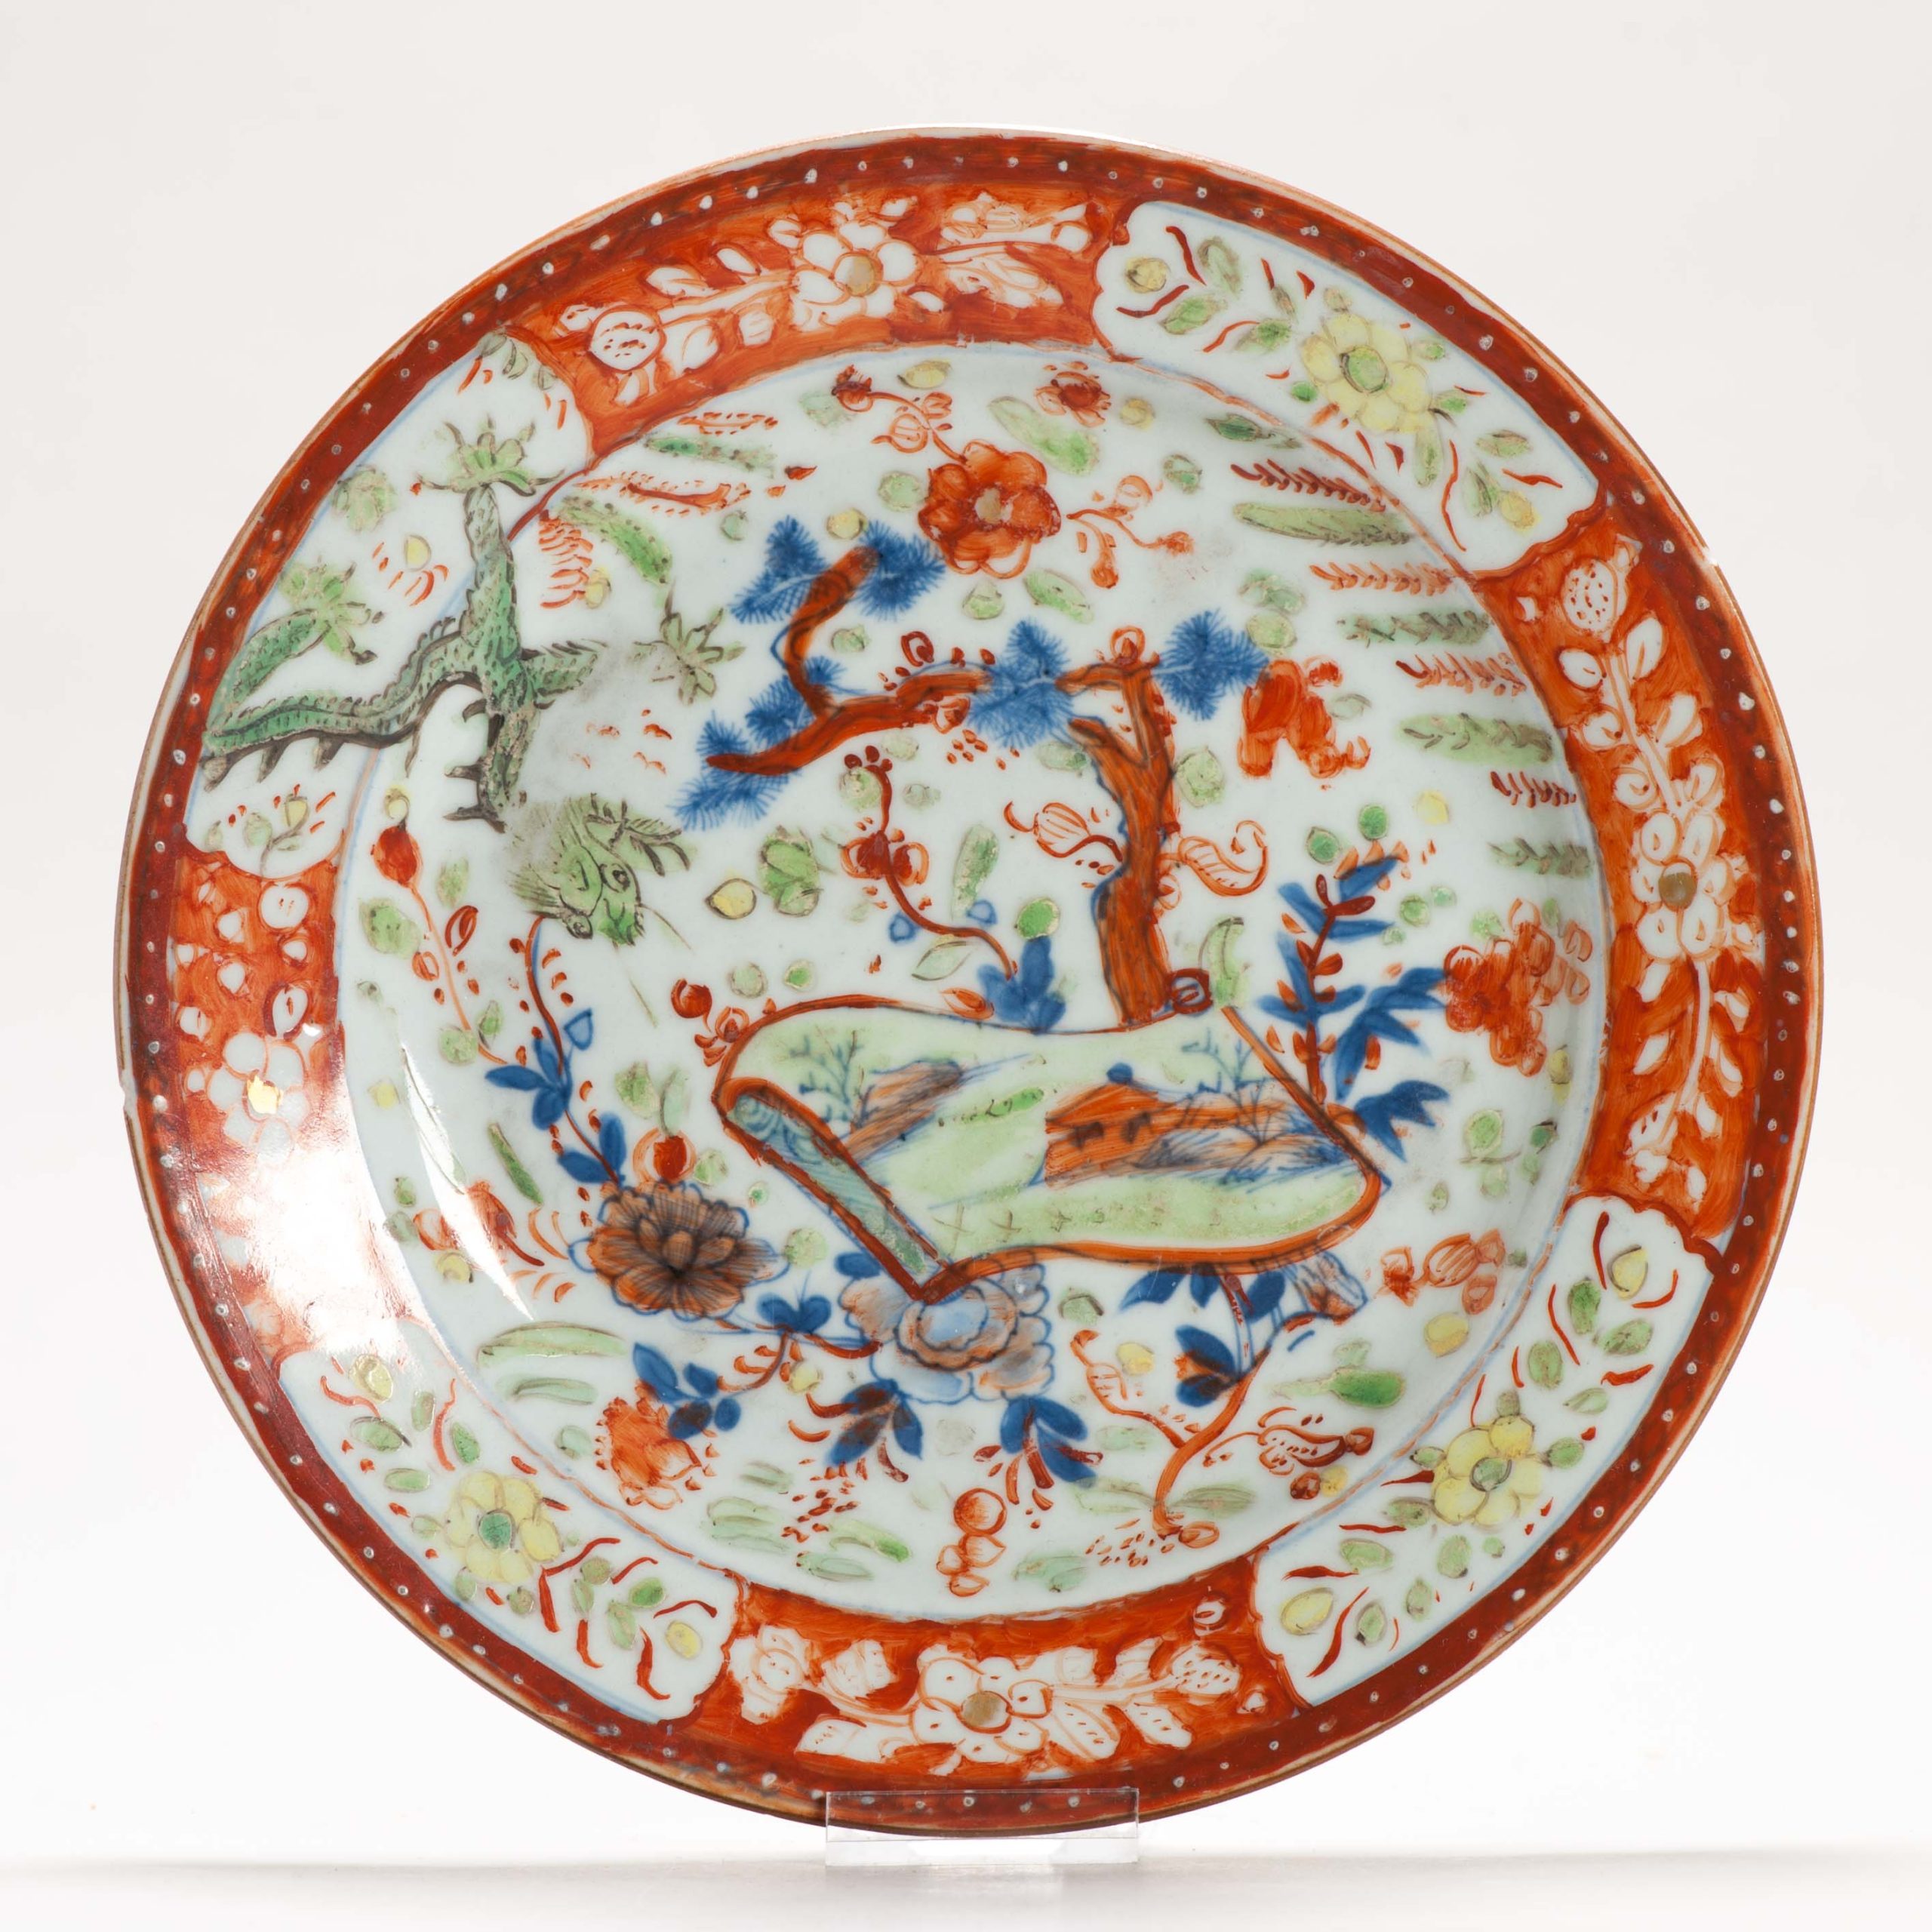 1285 Redecorated Qianlong Plate with overglaze European Decoration